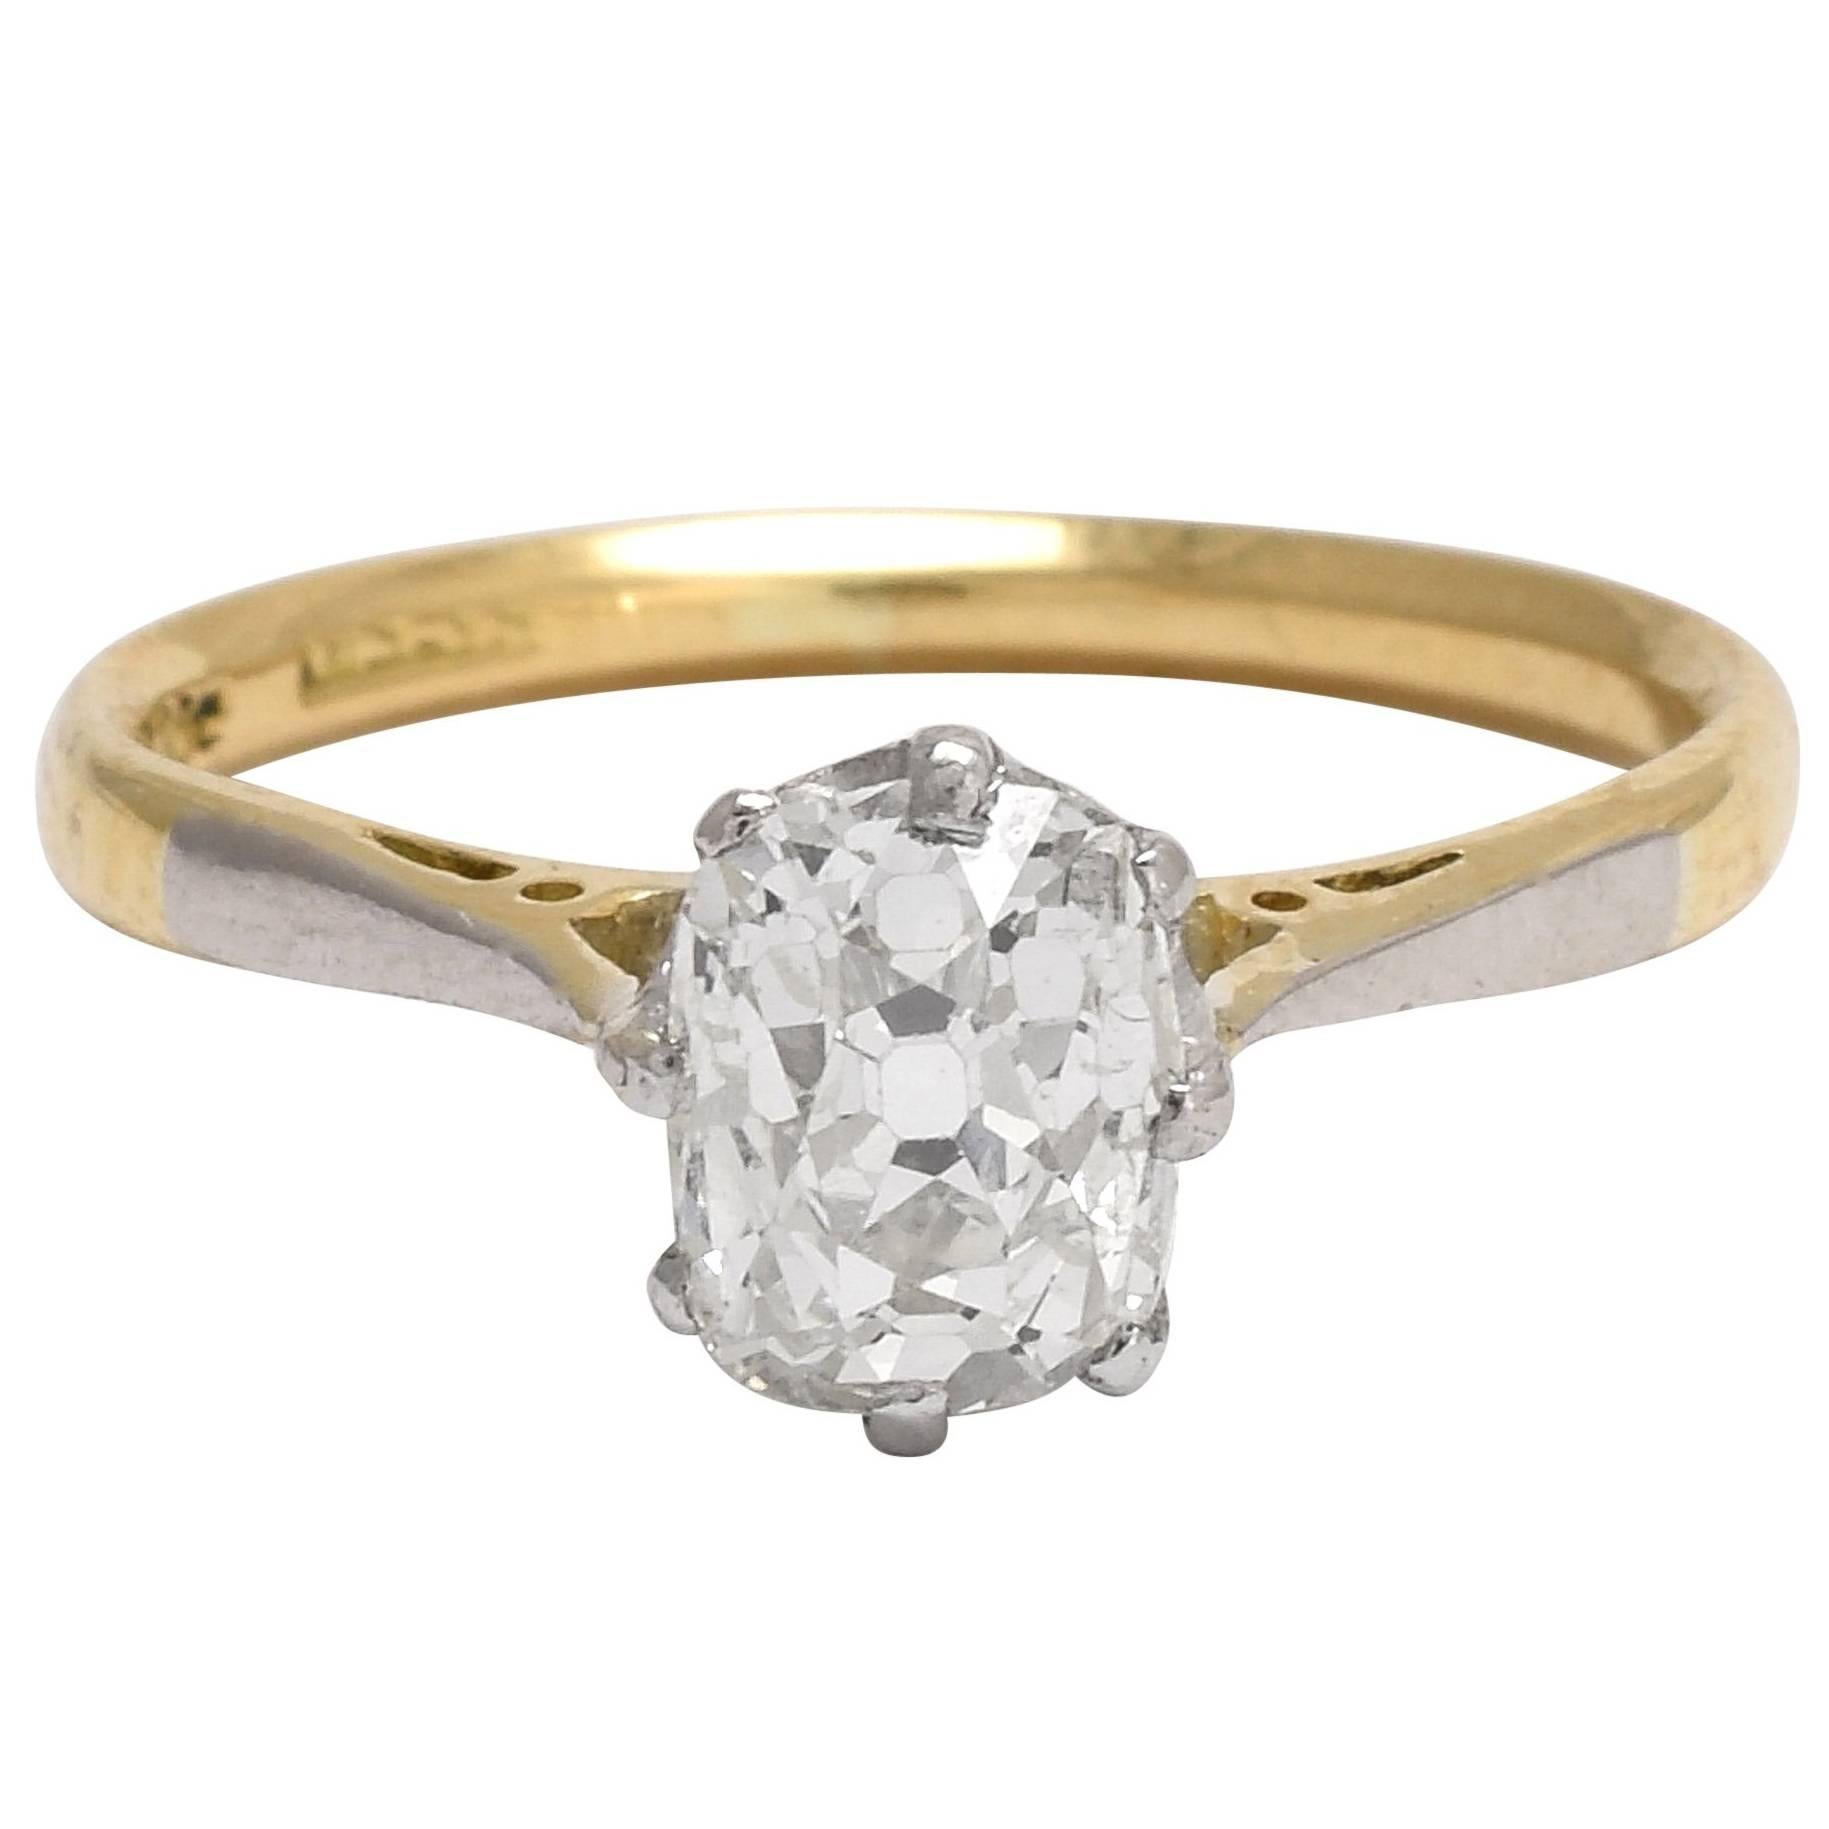 Victorian 1.5 Carat Old Mine Cut Diamond Gold Solitaire Ring